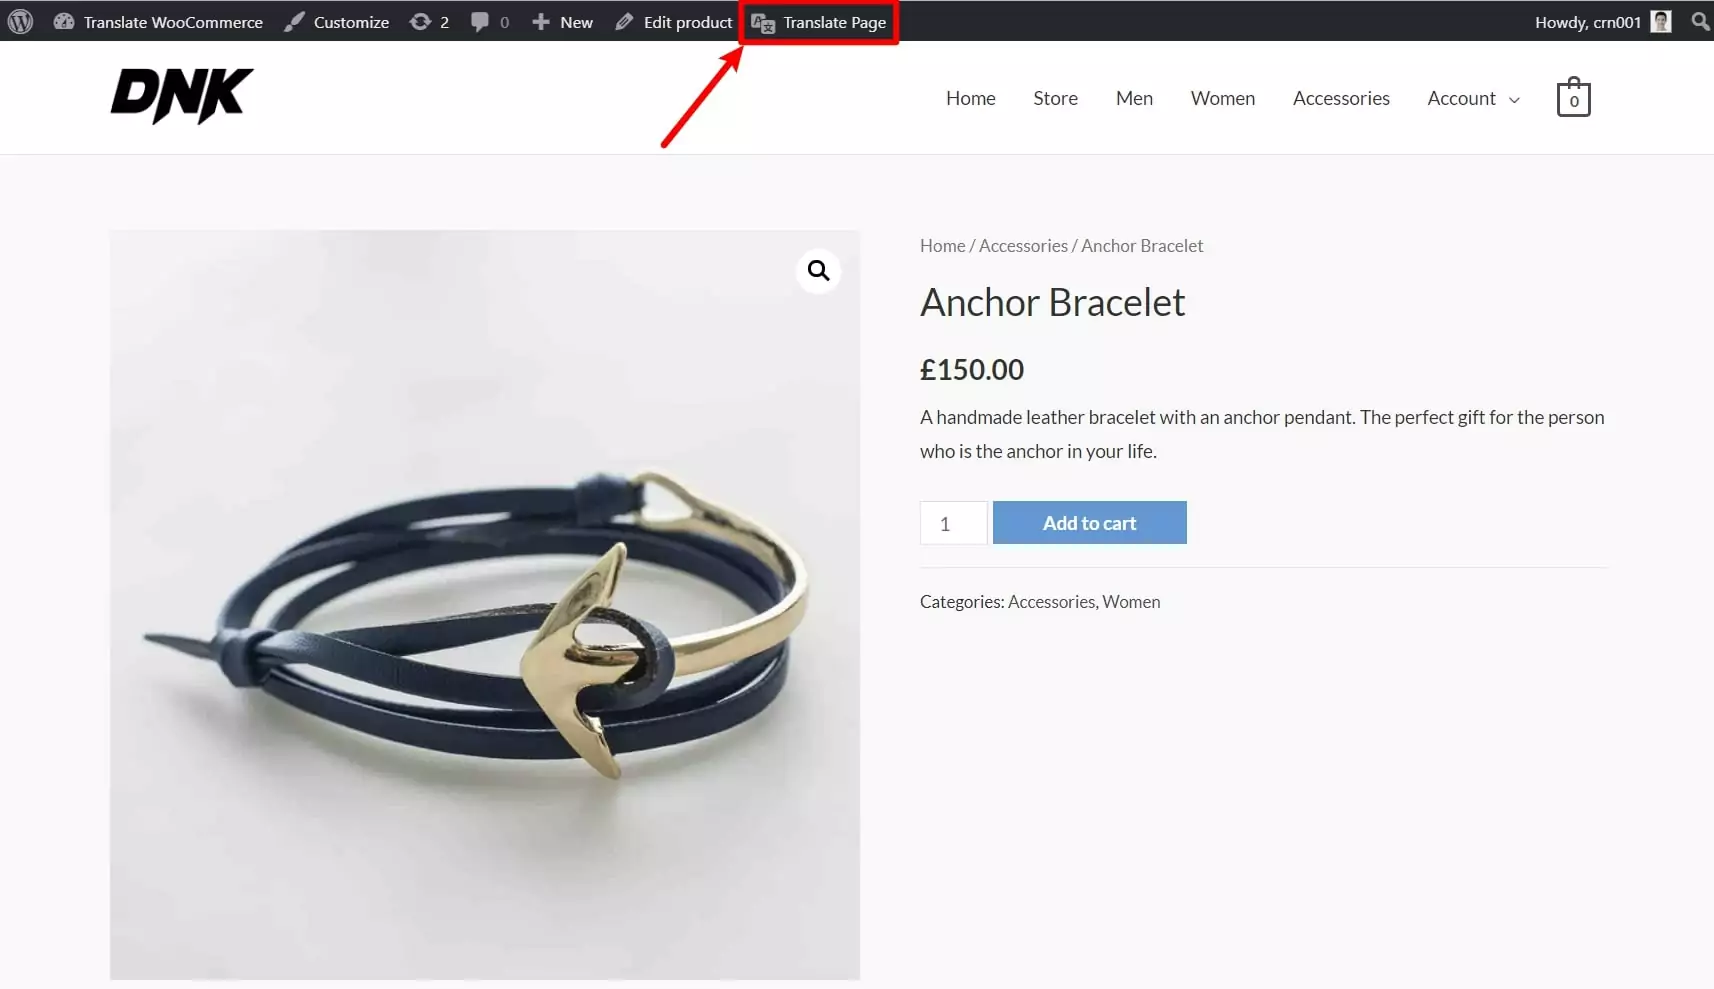 How to access WooCommerce translation editor